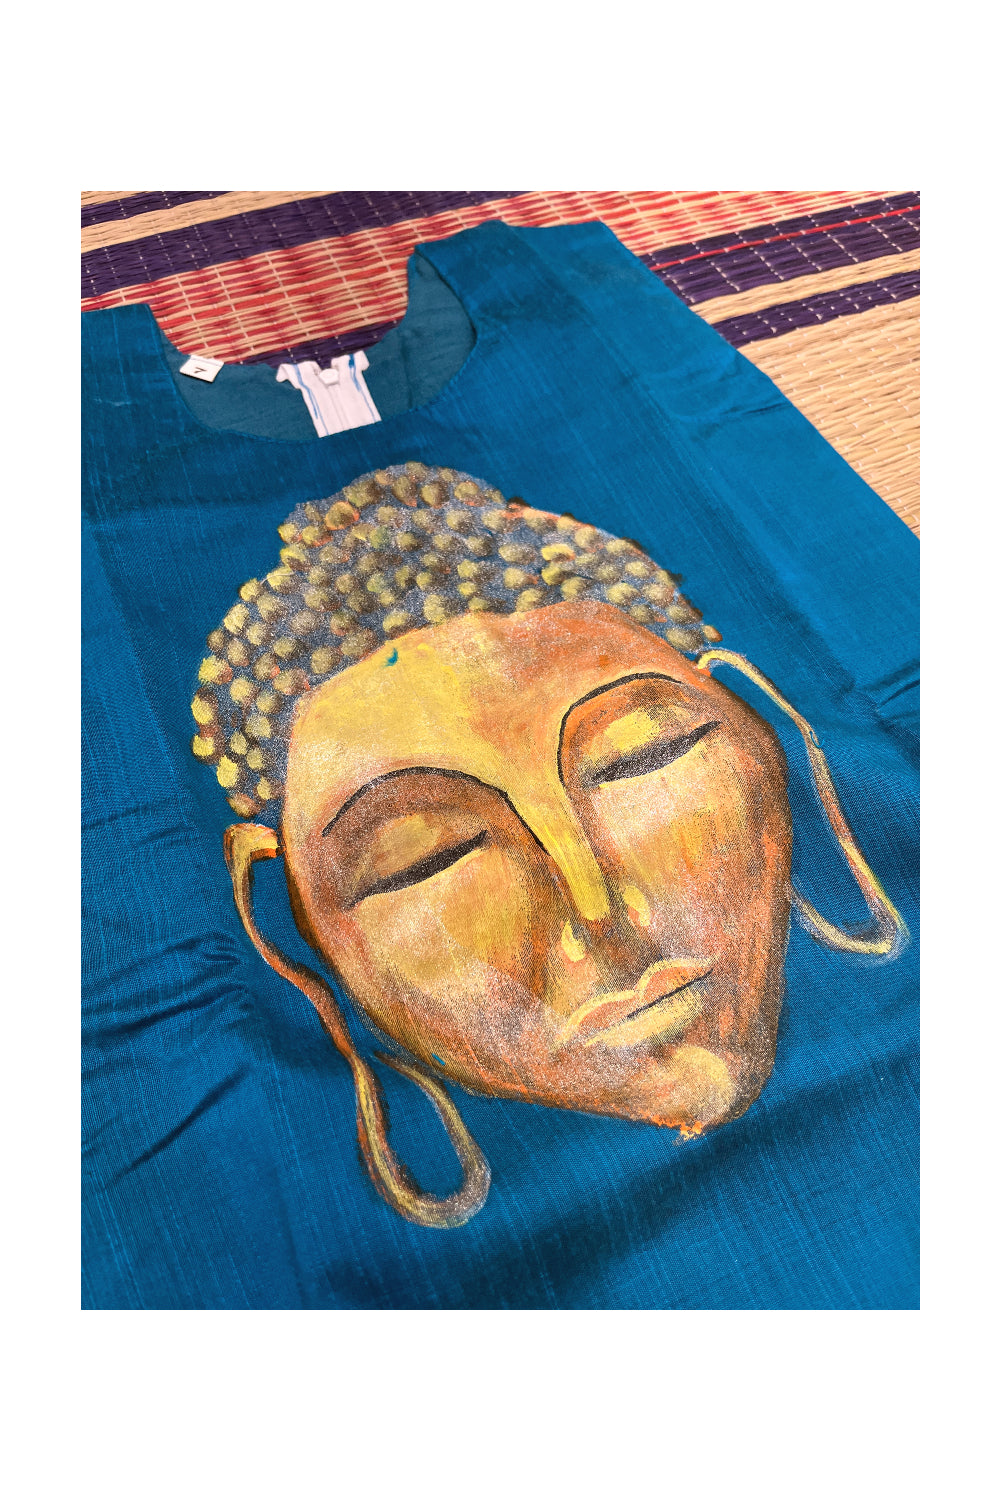 Southloom Kerala Pavada Blue Blouse with Buddha Mural Designs (Age - 7 Years)